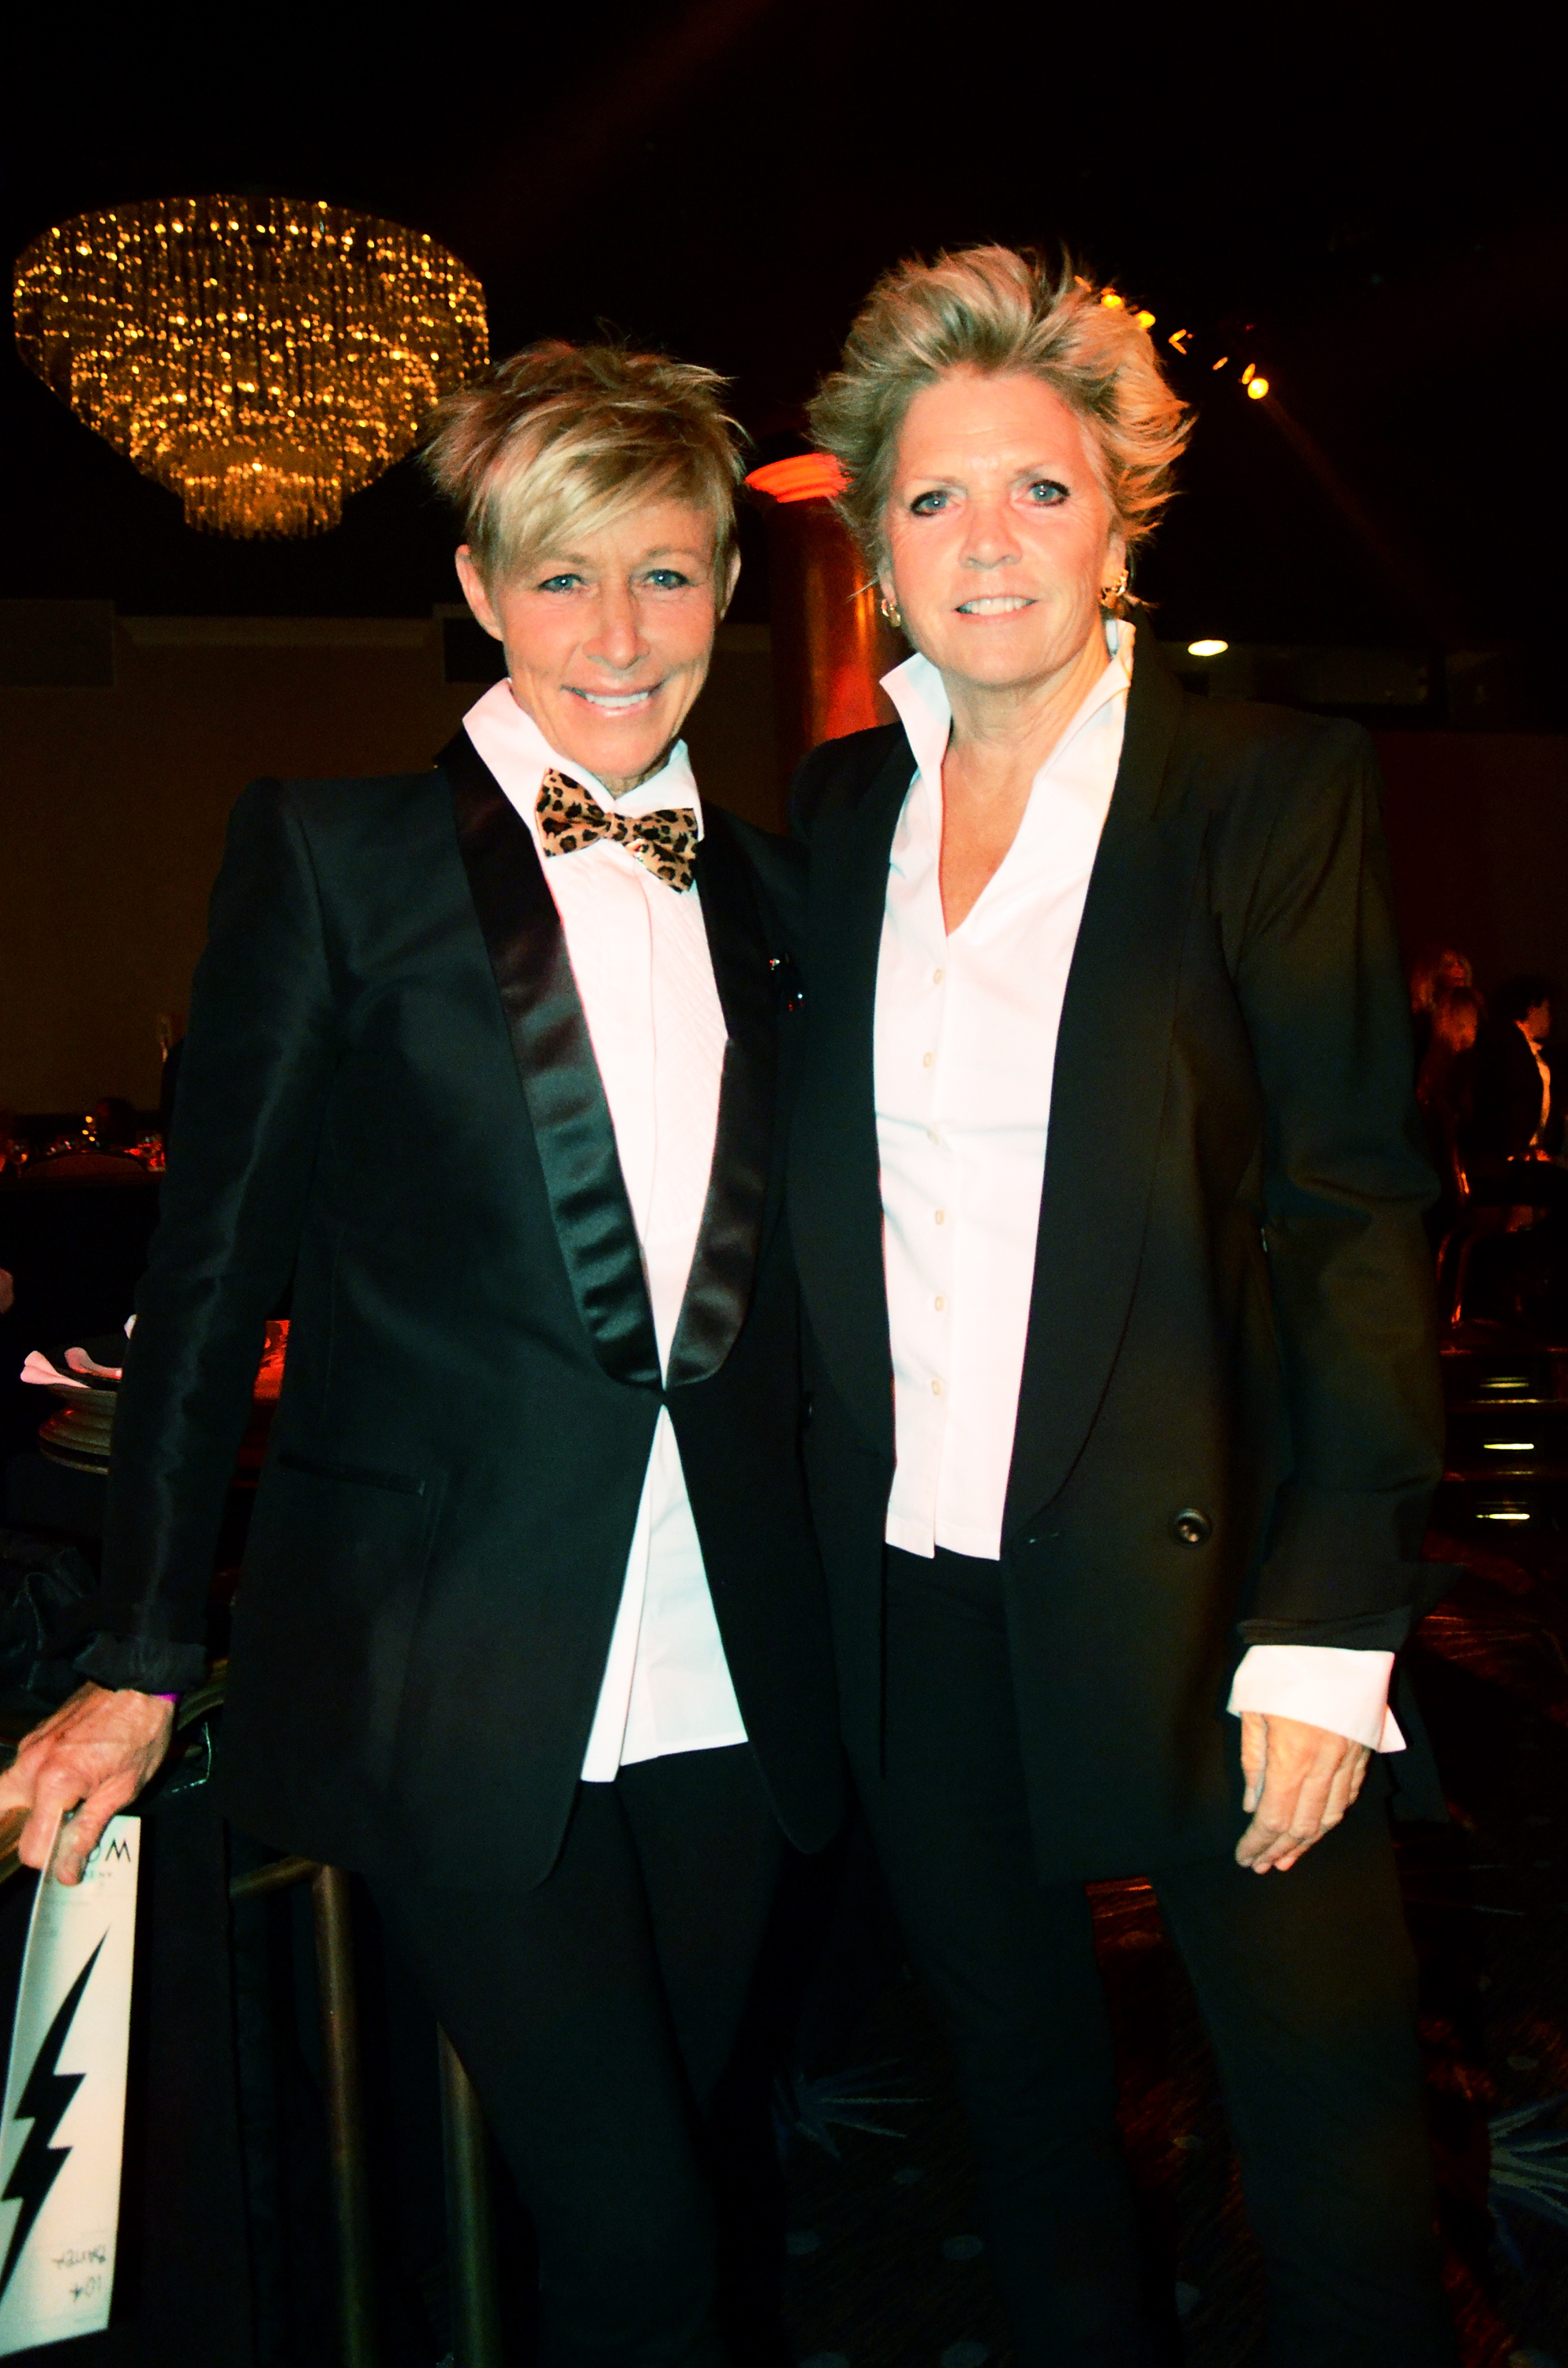 Nancy Locke and Meredith Baxter at the L.A. Gay & Lesbian Center's 2013 "An Evening With Women" gala on May 18, 2013, in Beverly Hills, California. | Source: Getty Images